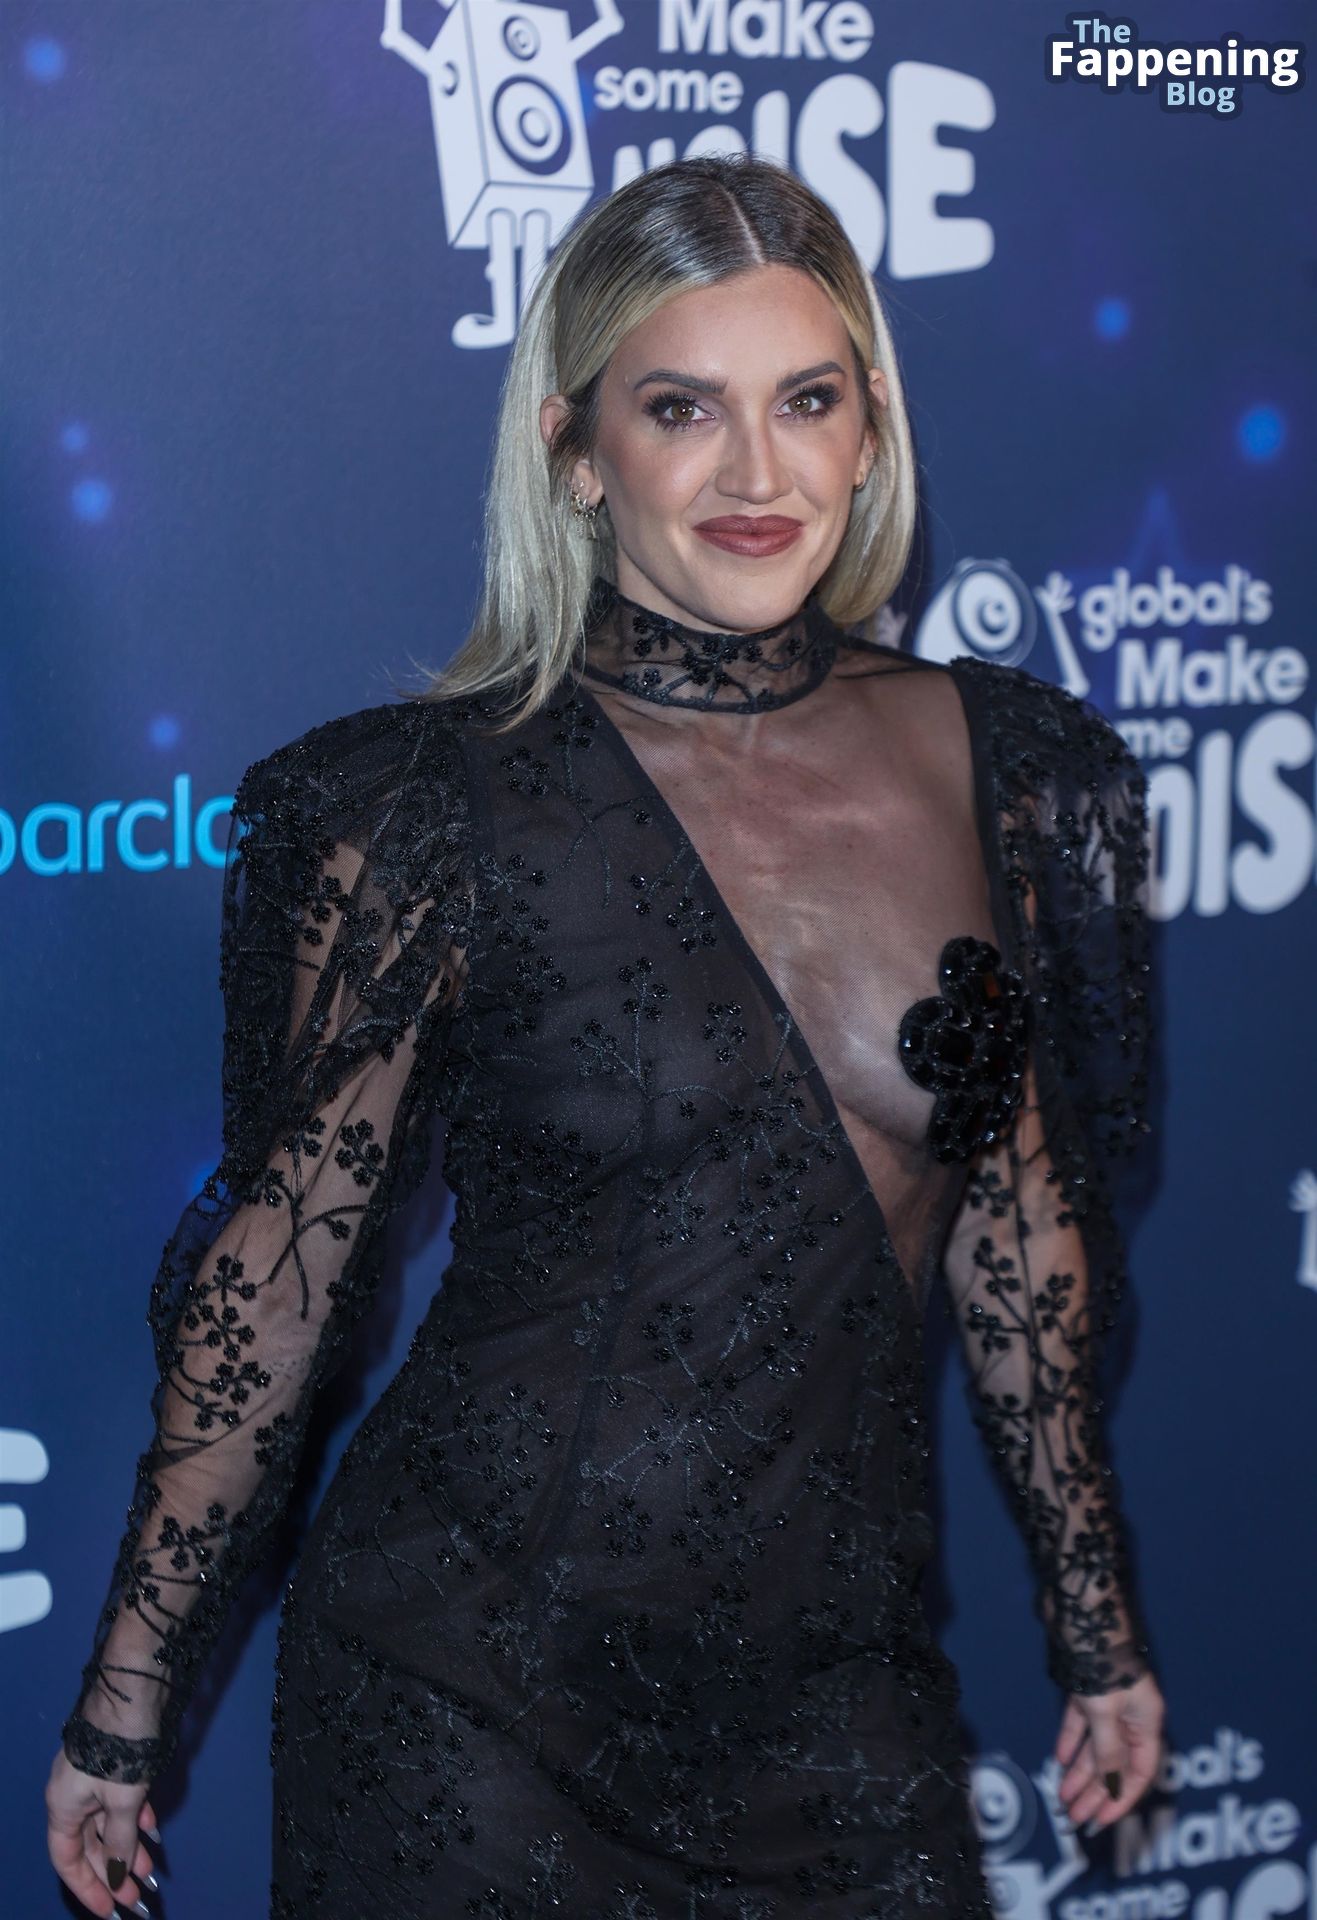 Ashley Roberts Goes Braless in a Lace Dress at Global’s Make Some Noise Charity Gala (39 Photos)